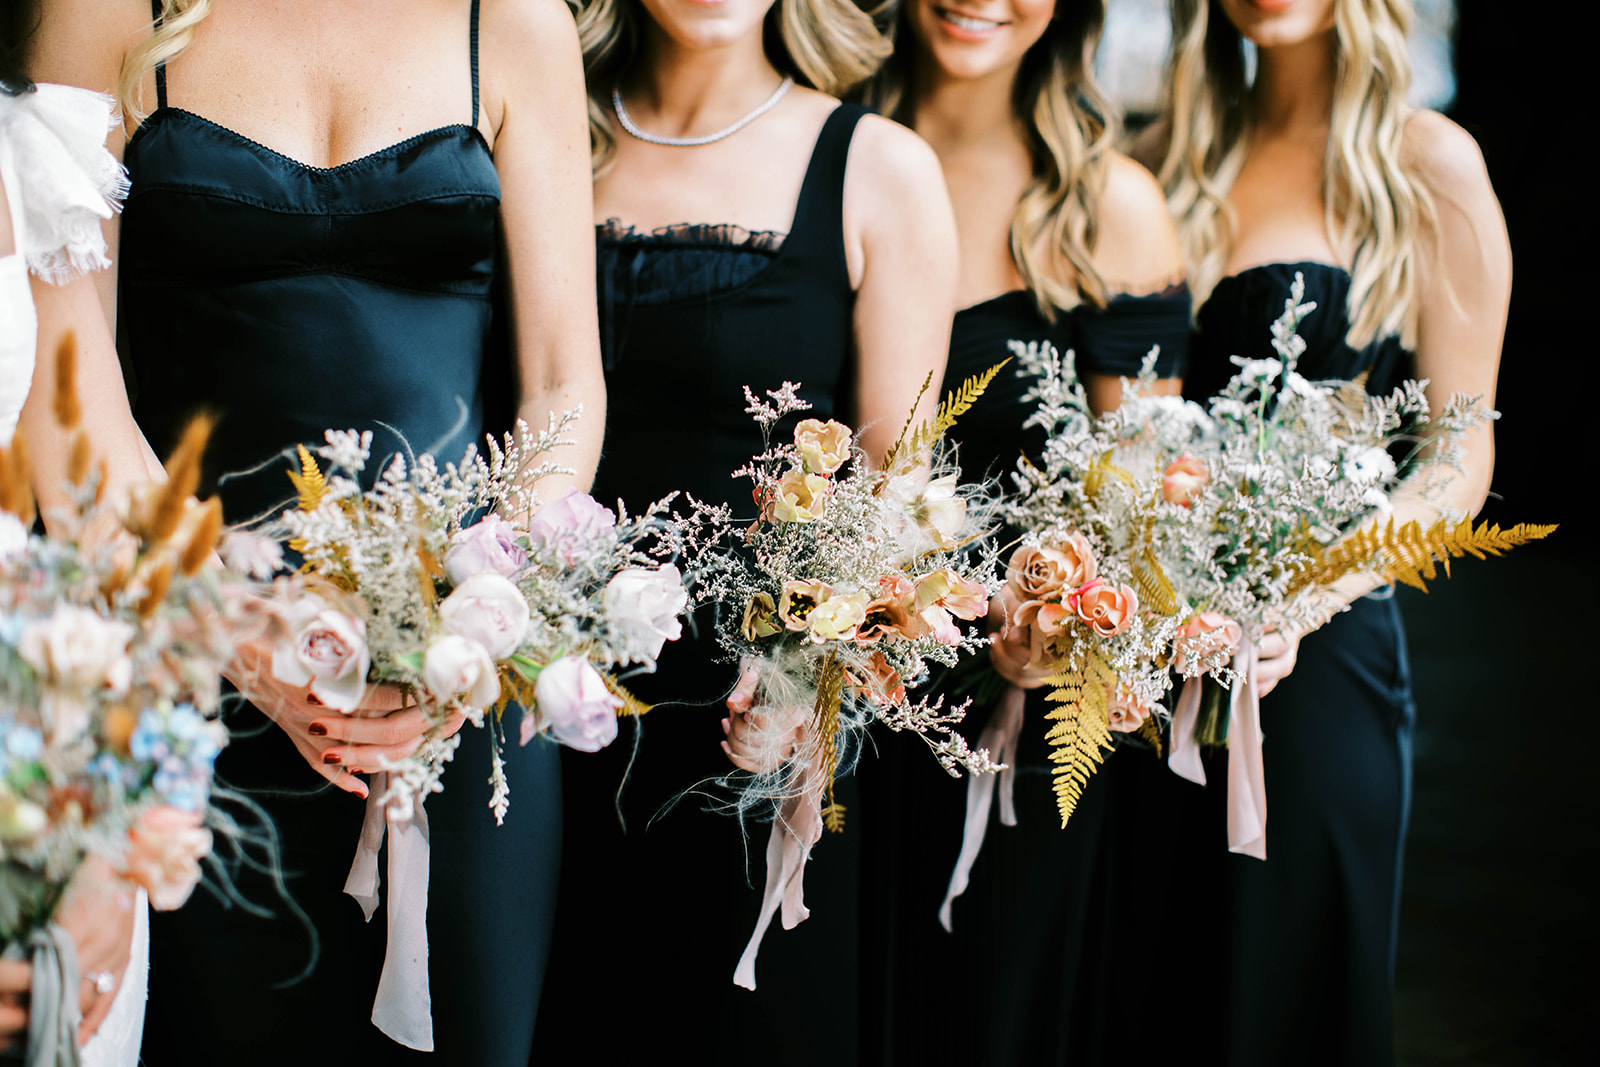 eclectic bridesmaids bouquets for a vintage aesthetic ranch wedding in park city utah. photo by megan robinson photography. 